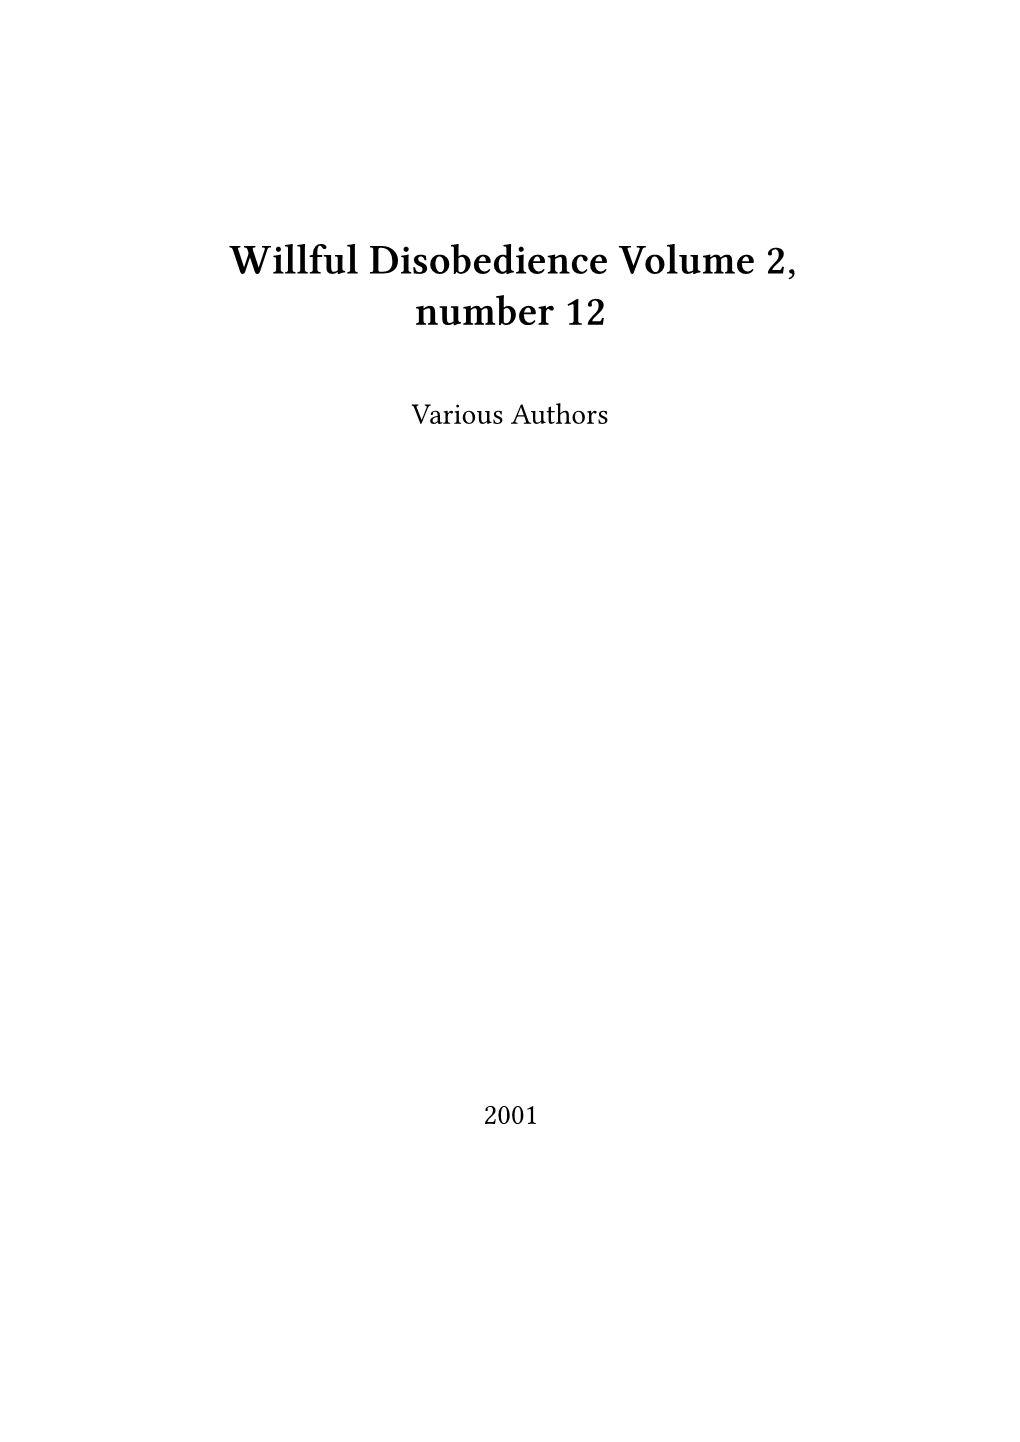 Willful Disobedience Volume 2, Number 12